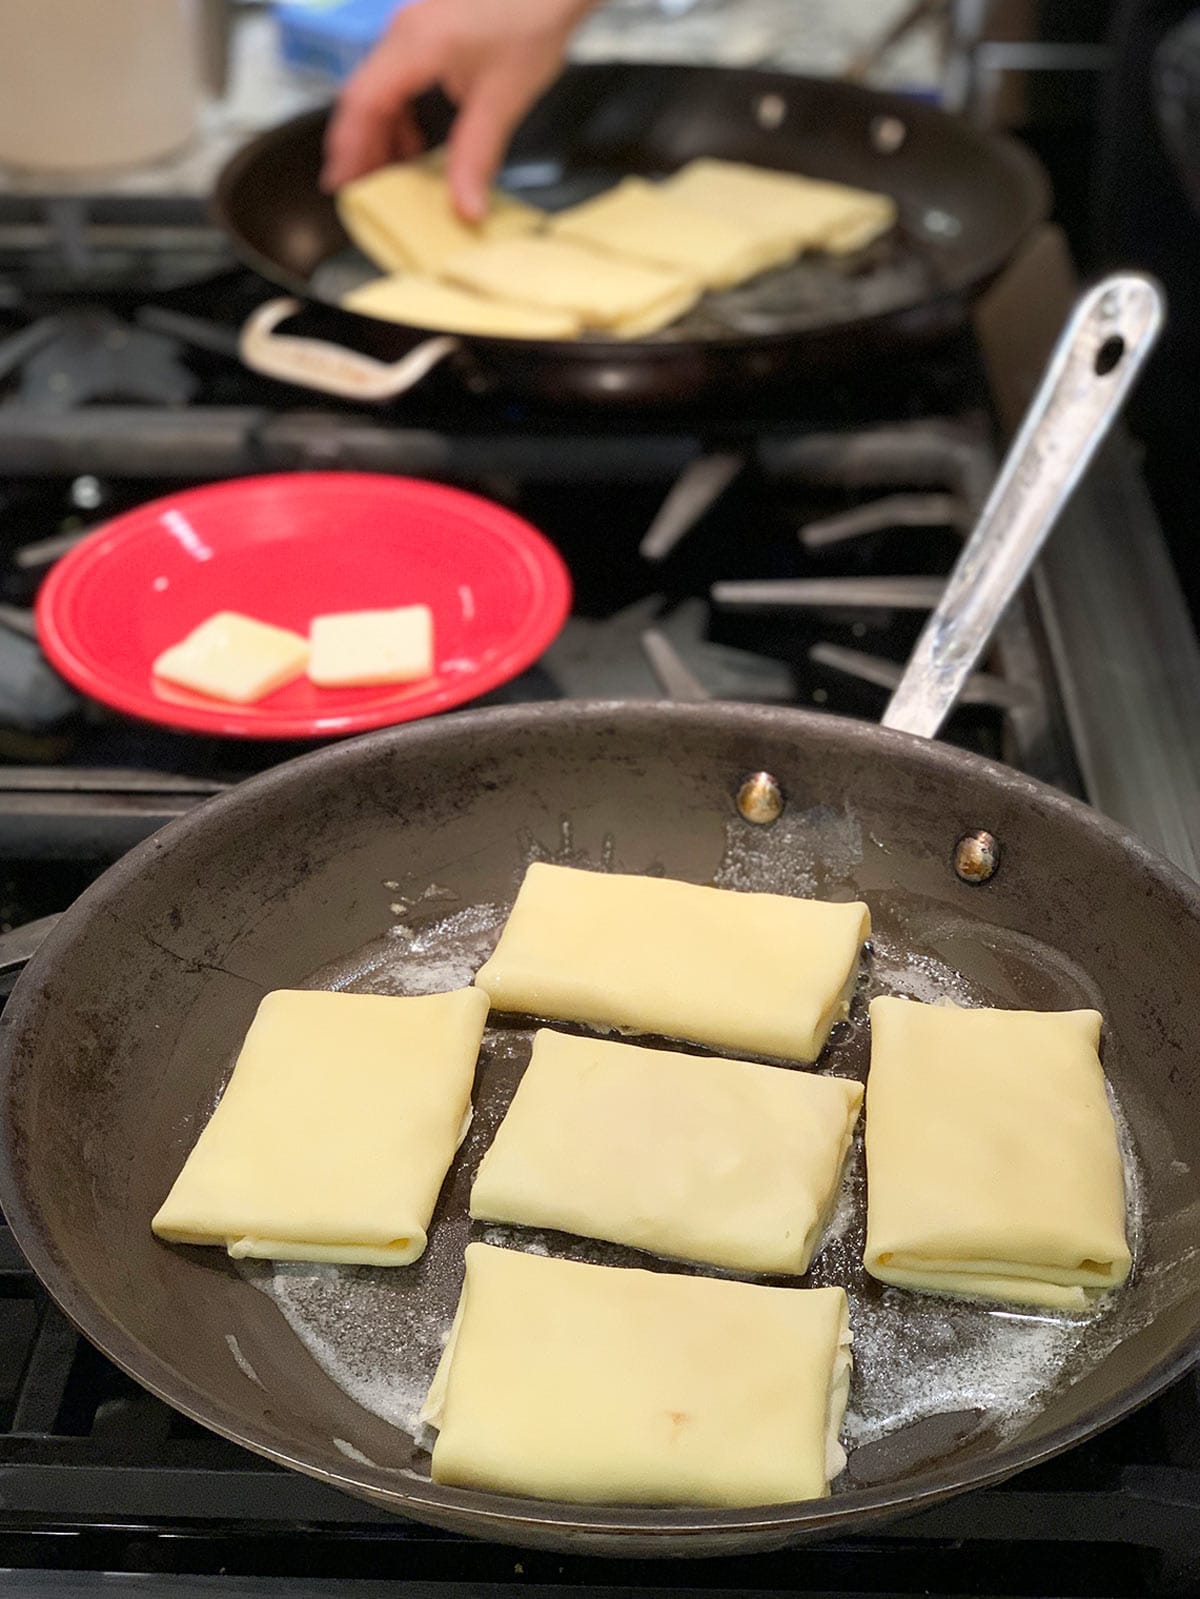 Several blintzes cooking in large pan on stove.